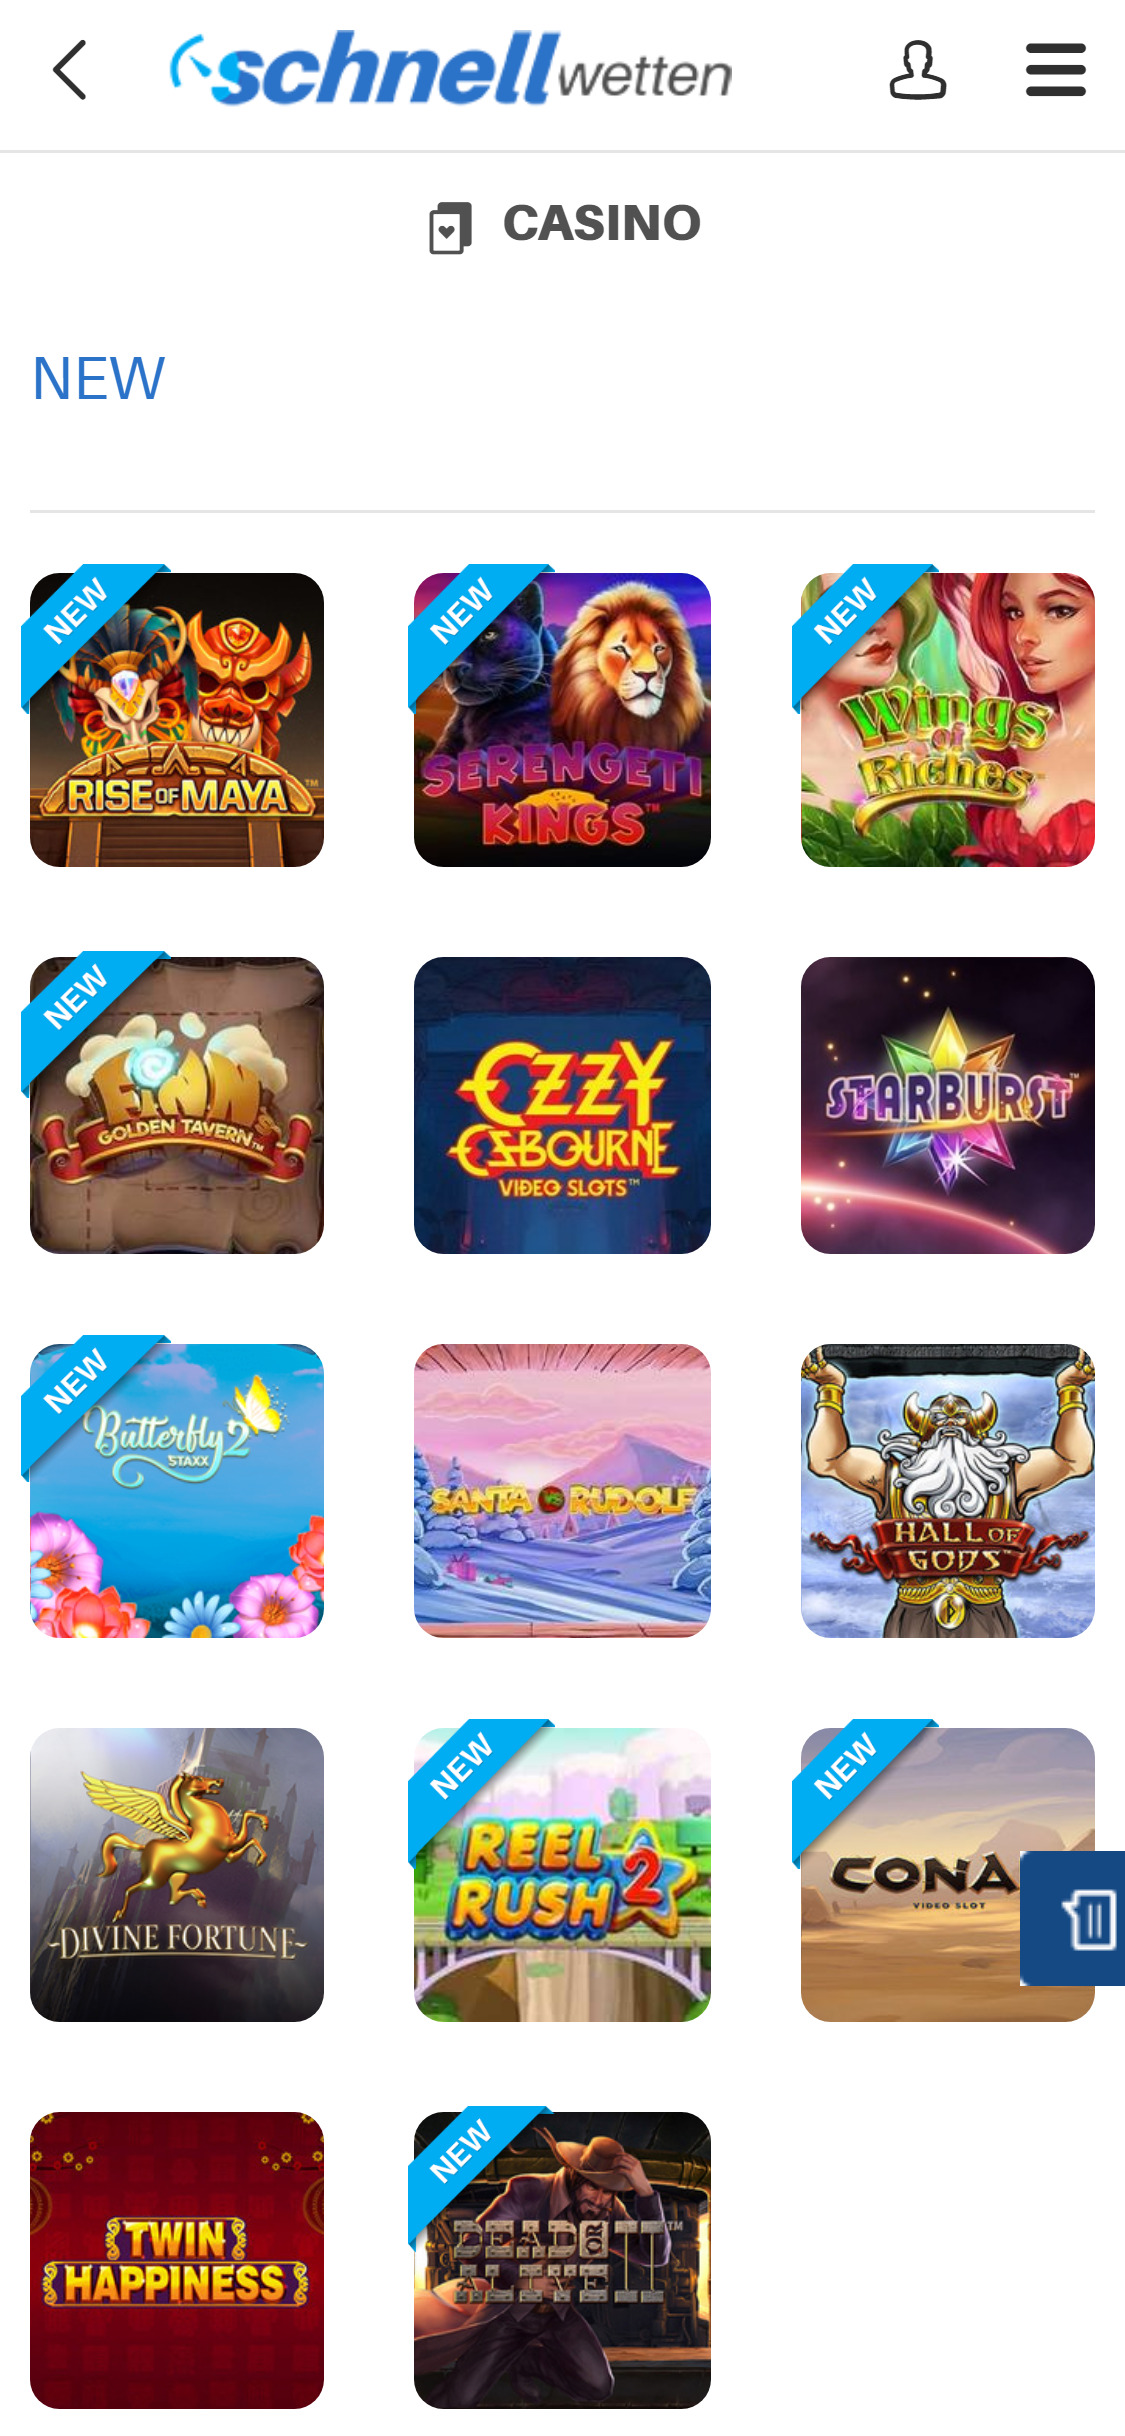 SchnellWetten Casino Mobile Games Review